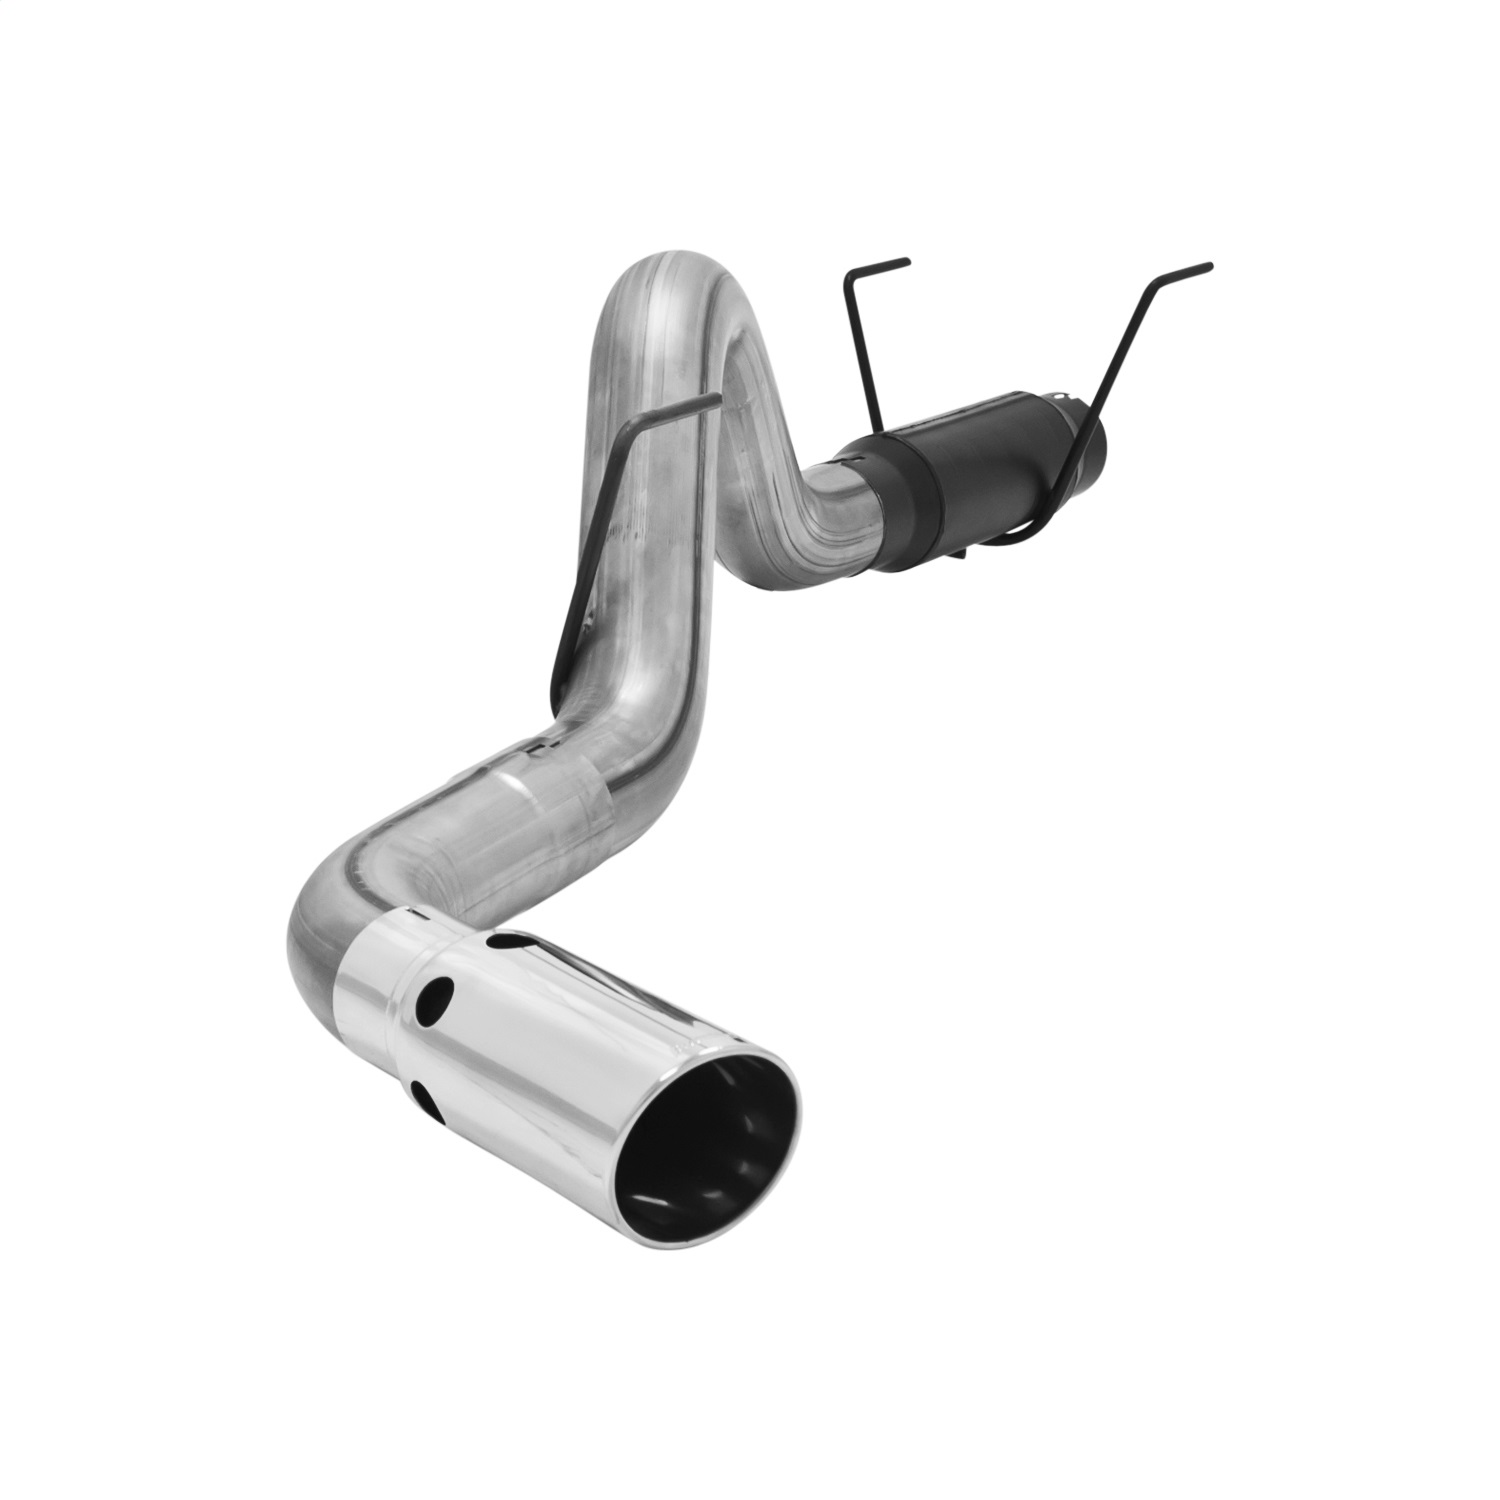 Flowmaster Flowmaster 817621 Force II DPF-Back Exhaust System